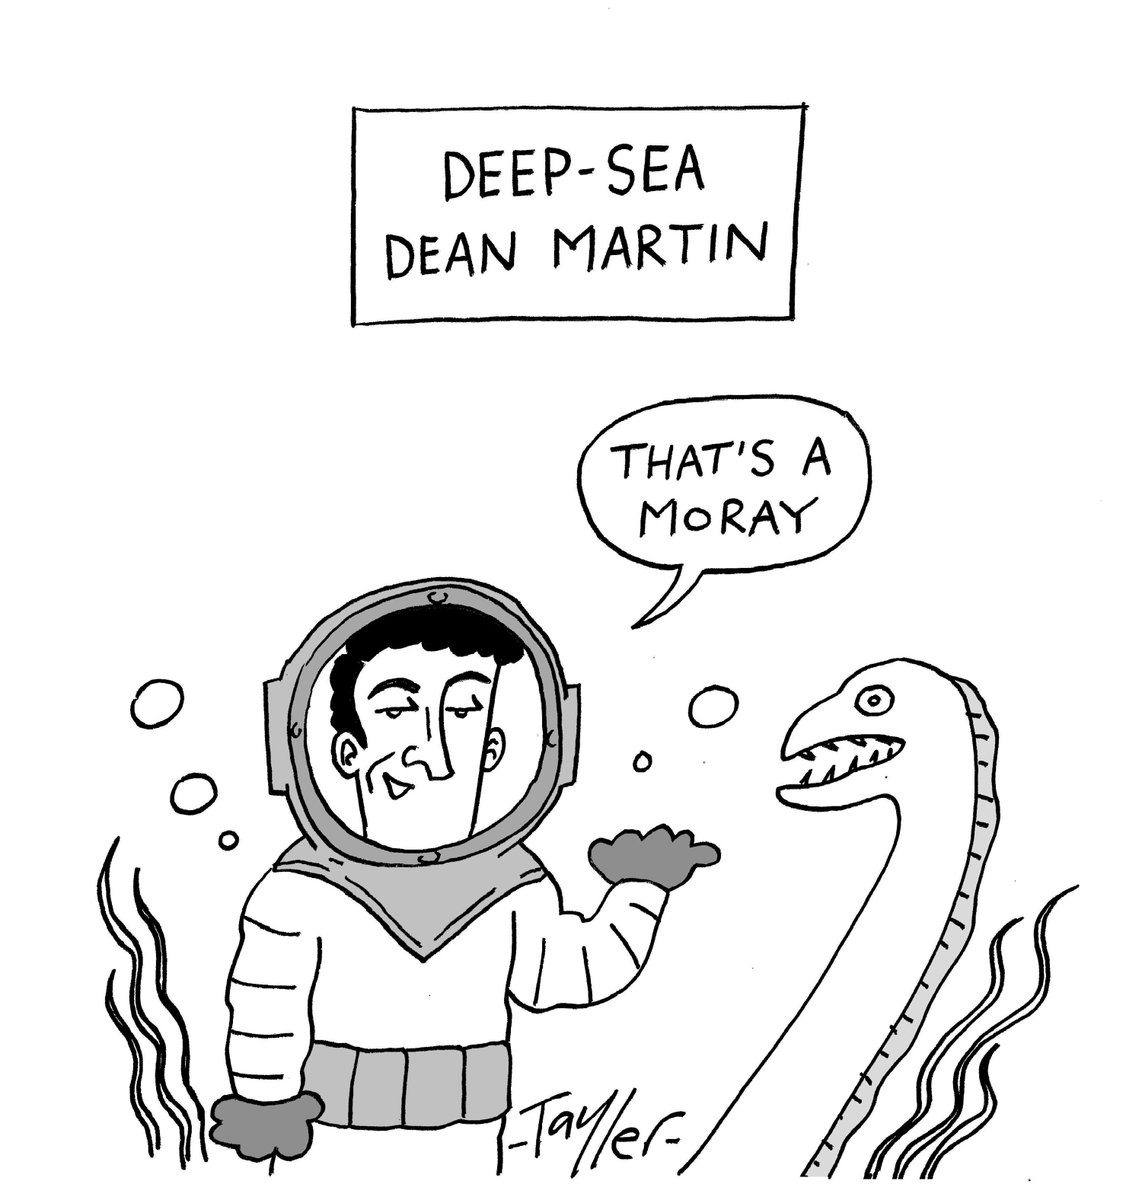 'Deep-Sea Dean Martin' (as seen in Viz comic) signed A4 print available to buy here 👇 etsy.com/uk/listing/745…